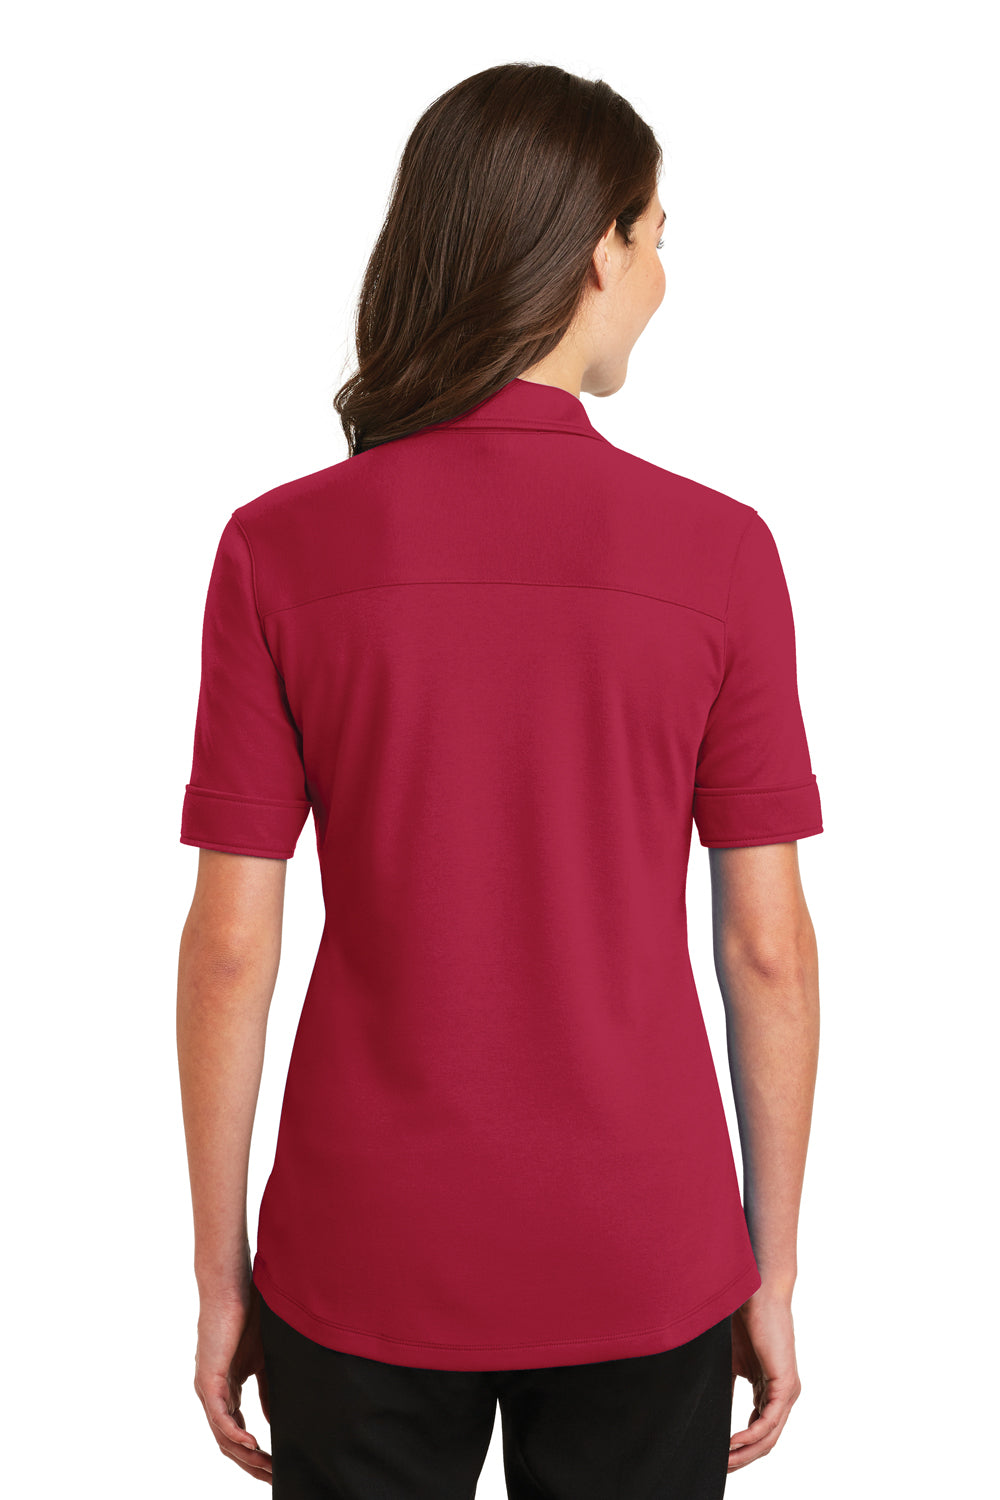 Port Authority L5200 Womens Silk Touch Performance Moisture Wicking Short Sleeve Polo Shirt Red Back